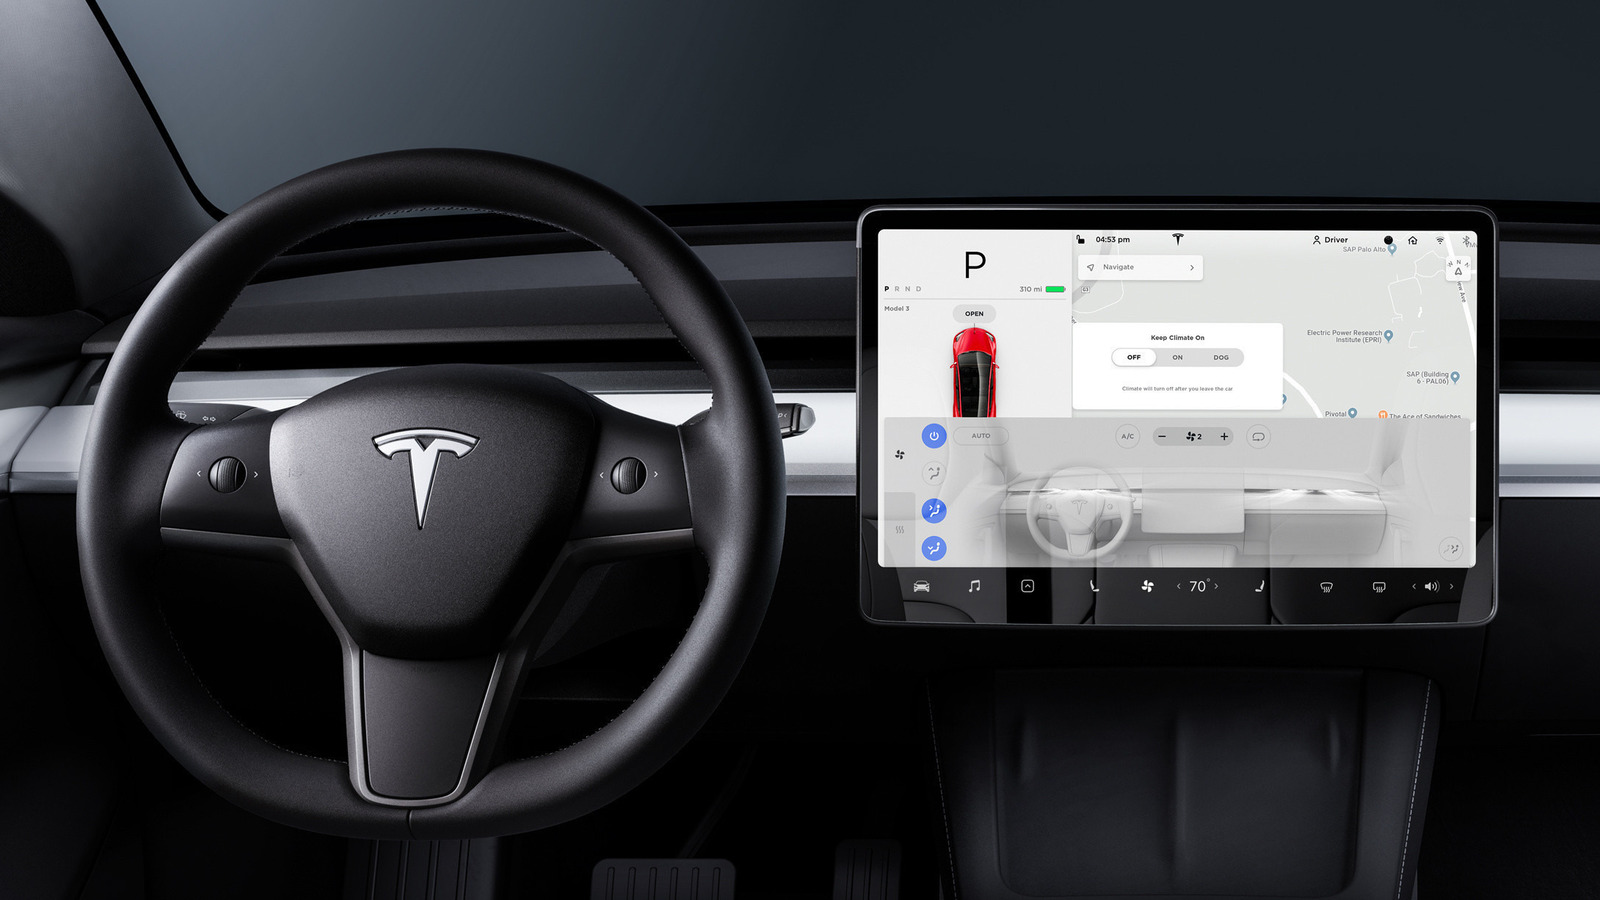 Tesla Screen Cleaning Mode: How to Turn on and Turn Off? - Ev Seekers